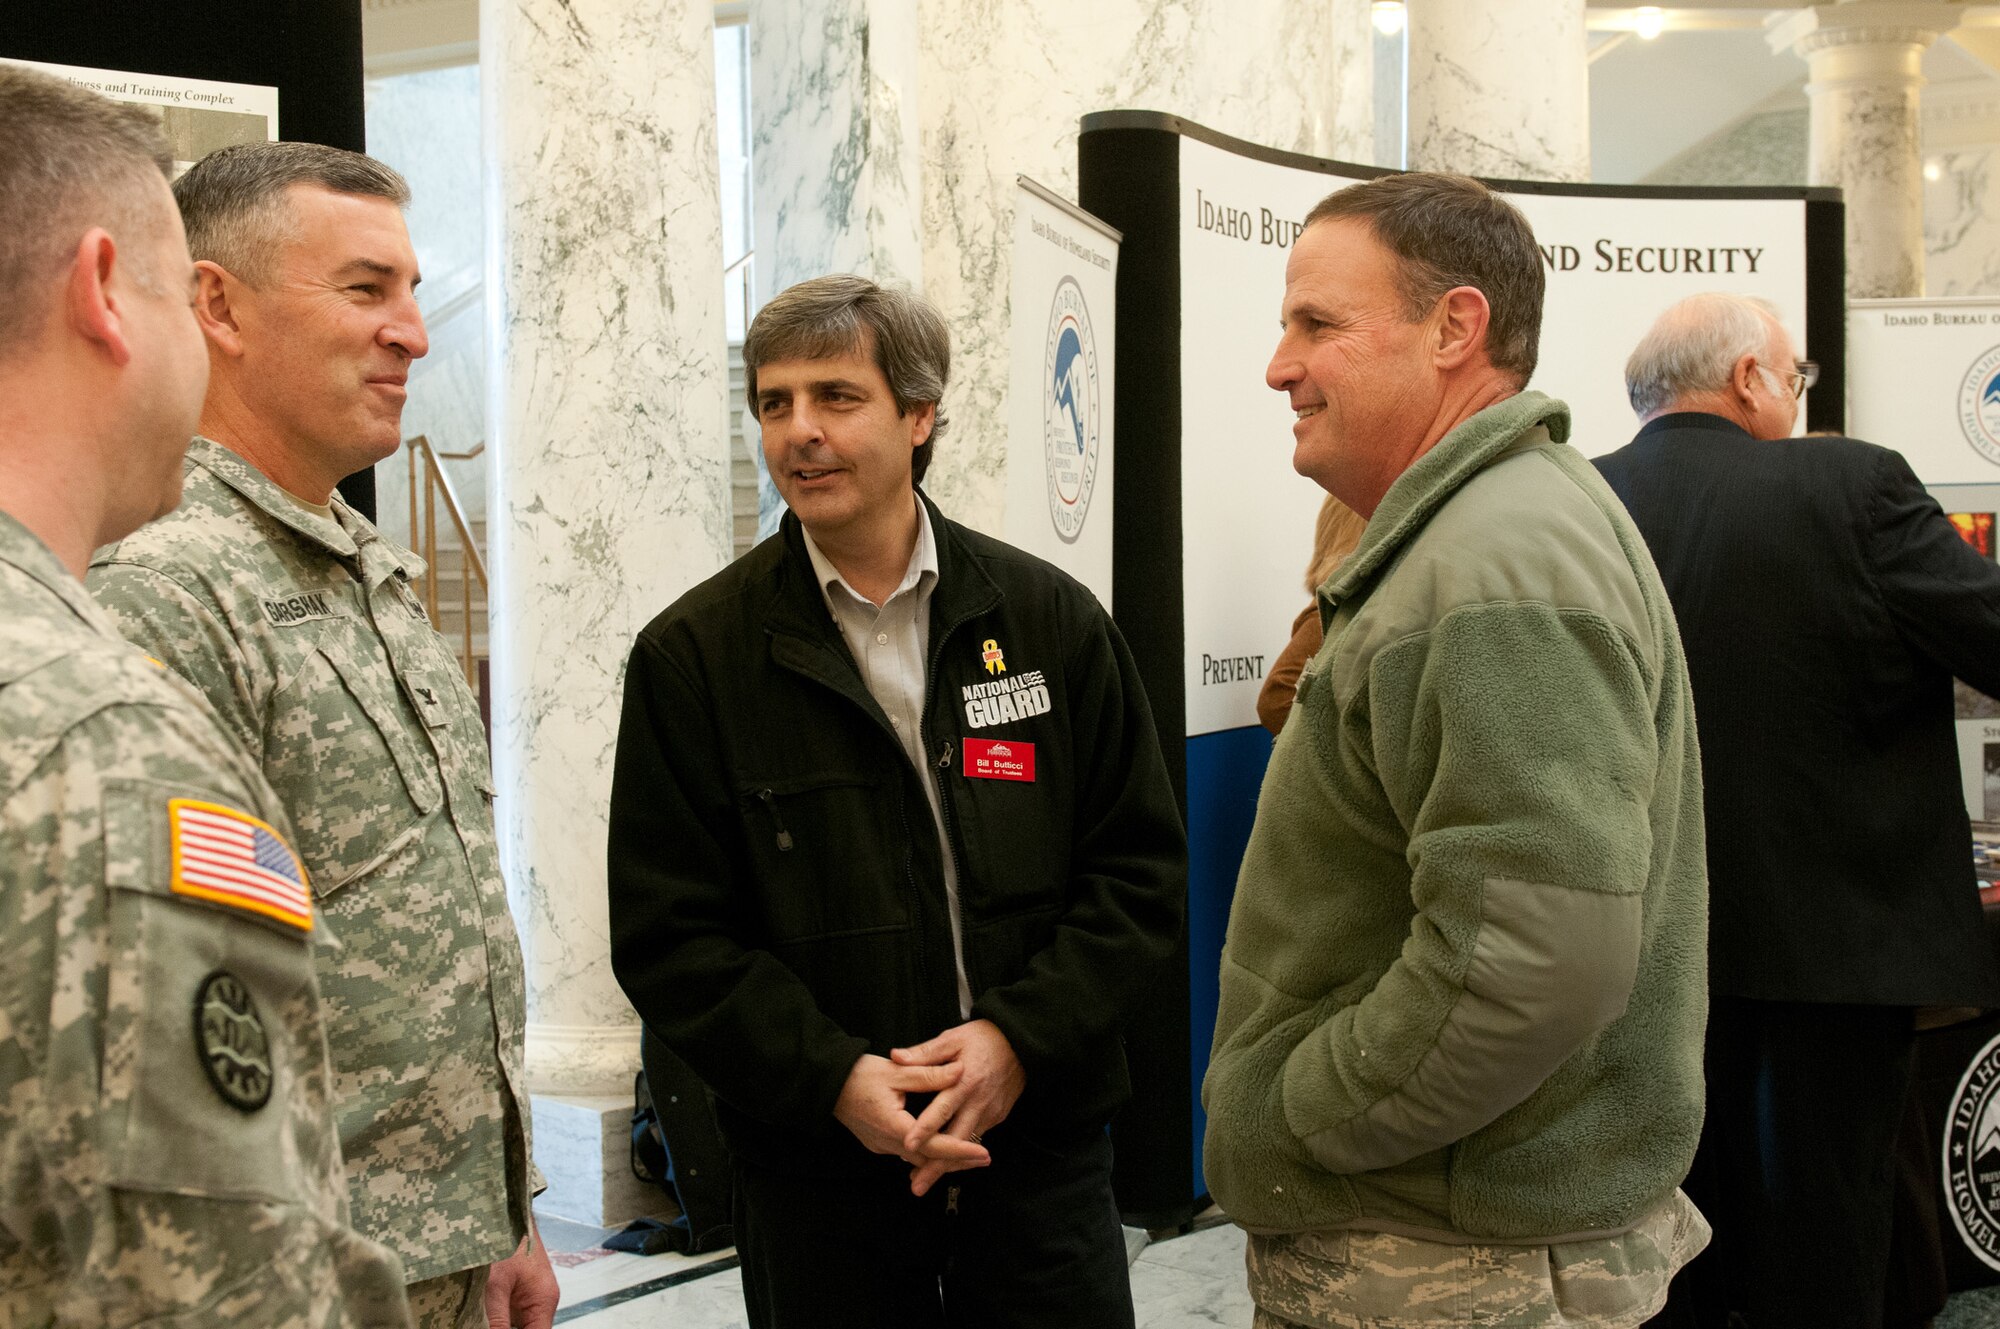 Bill Butticci, a member of the Board of Trustees, talks with Brig. Gen. Richard Turner, right, Assistant Adjutant General, Air, and Col. Michael Garshak, left, Director of Operations from the Idaho Army National Guard, regarding a display about construction for future facilities and the economic impact contributing to the economy during the Military Division Legislative Day held at the State Capitol building in Boise, Idaho Jan. 15. (Air National Guard photo by Master Sgt. Becky Vanshur)